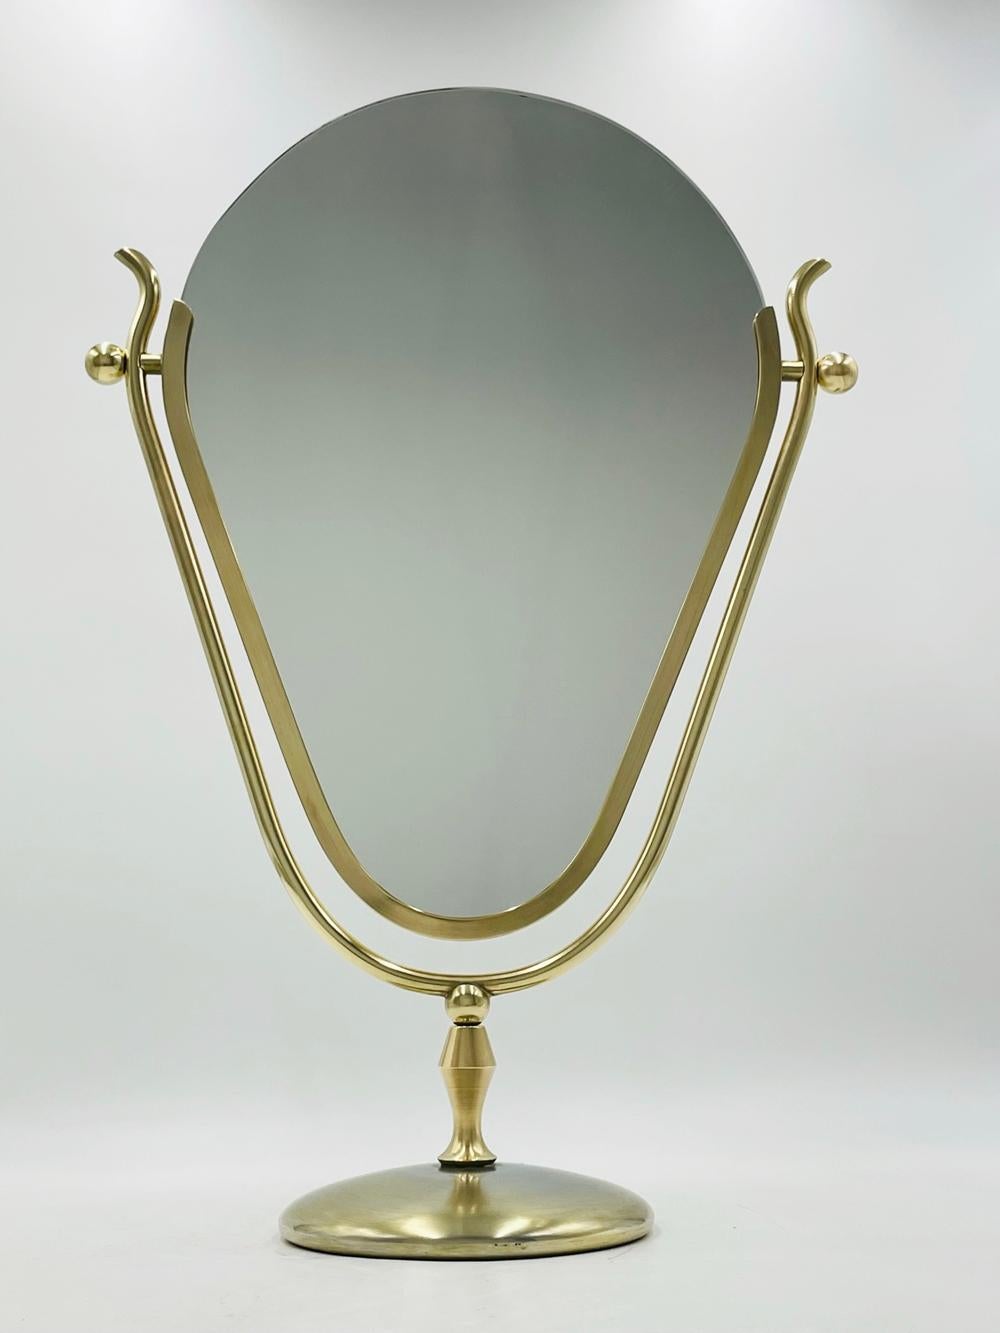 Introducing the Dual Side, Vanity Mirror in Brass by Charles Hollis Jones, Signed - a breathtaking addition to your decadent vanity space. Crafted with meticulous attention to detail, this mesmerizing mirror is a true testament to the designer's